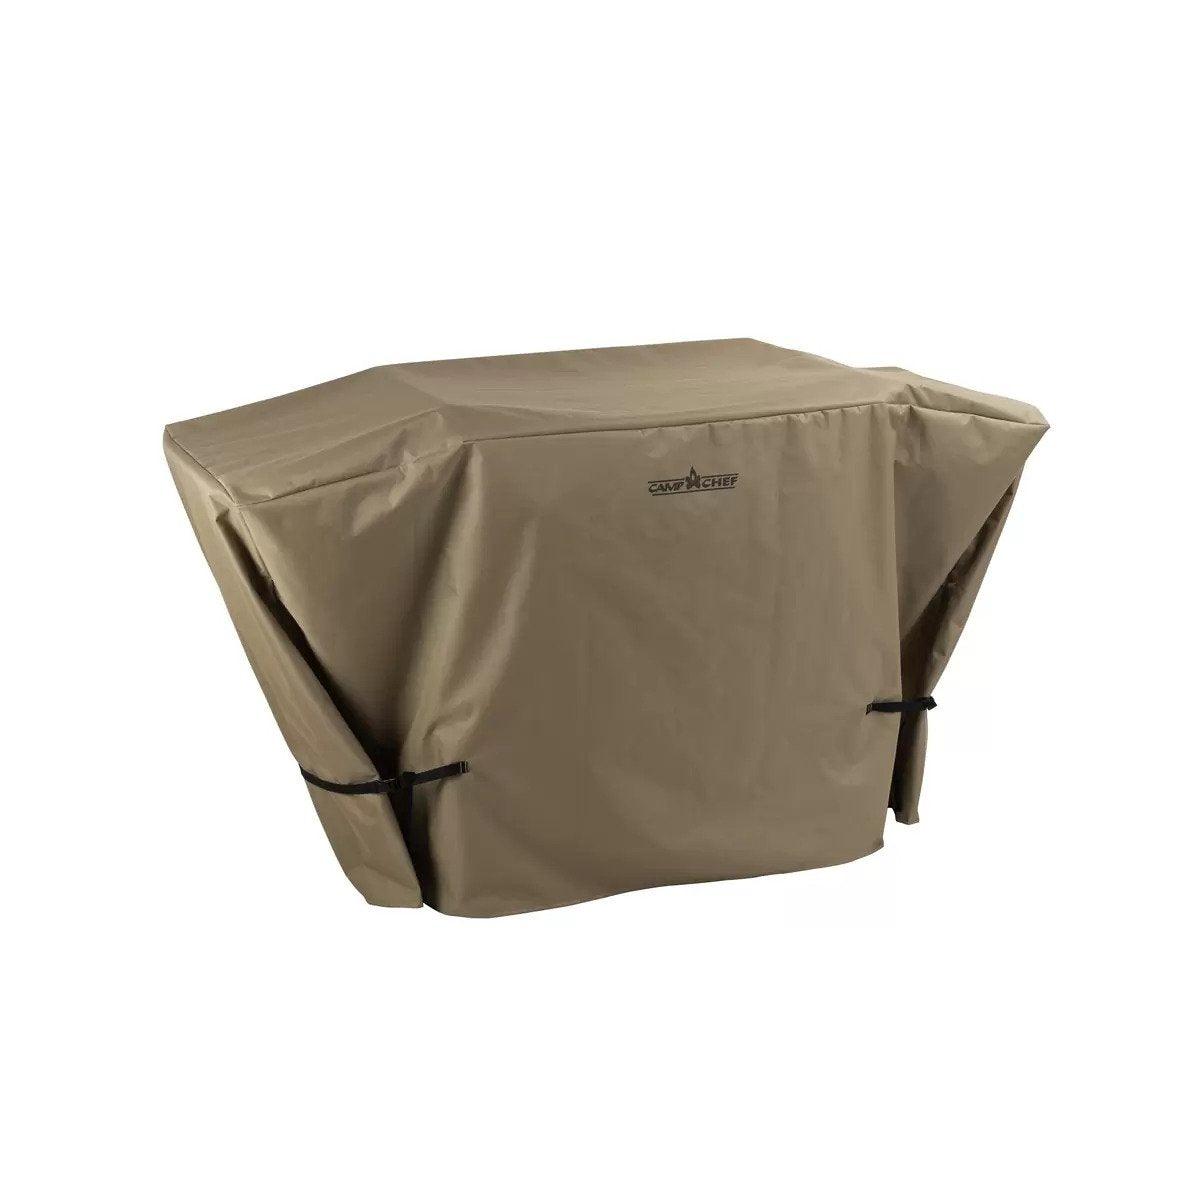 Camp Chef - Flat Top Grill BBQ 600 - Patio Cover - KegLand